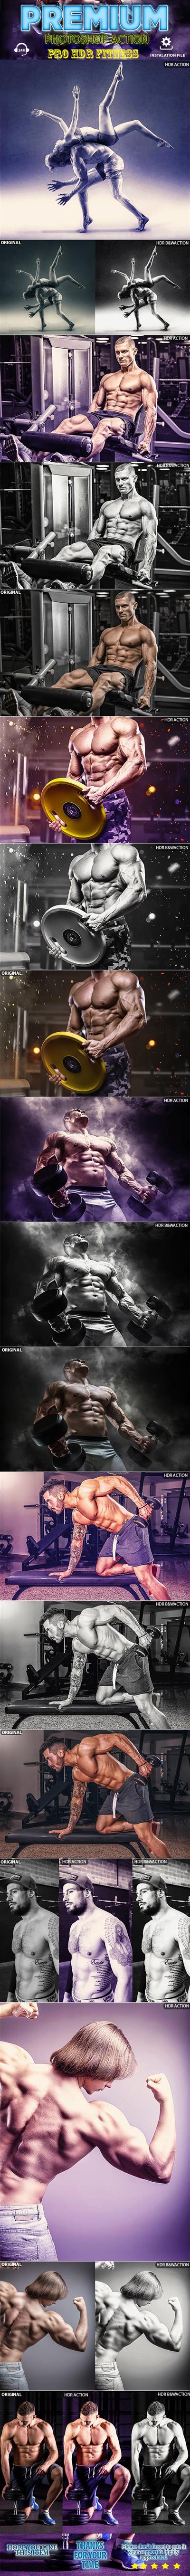 GraphicRiver - Fitness HDR Photoshop Action 23155601